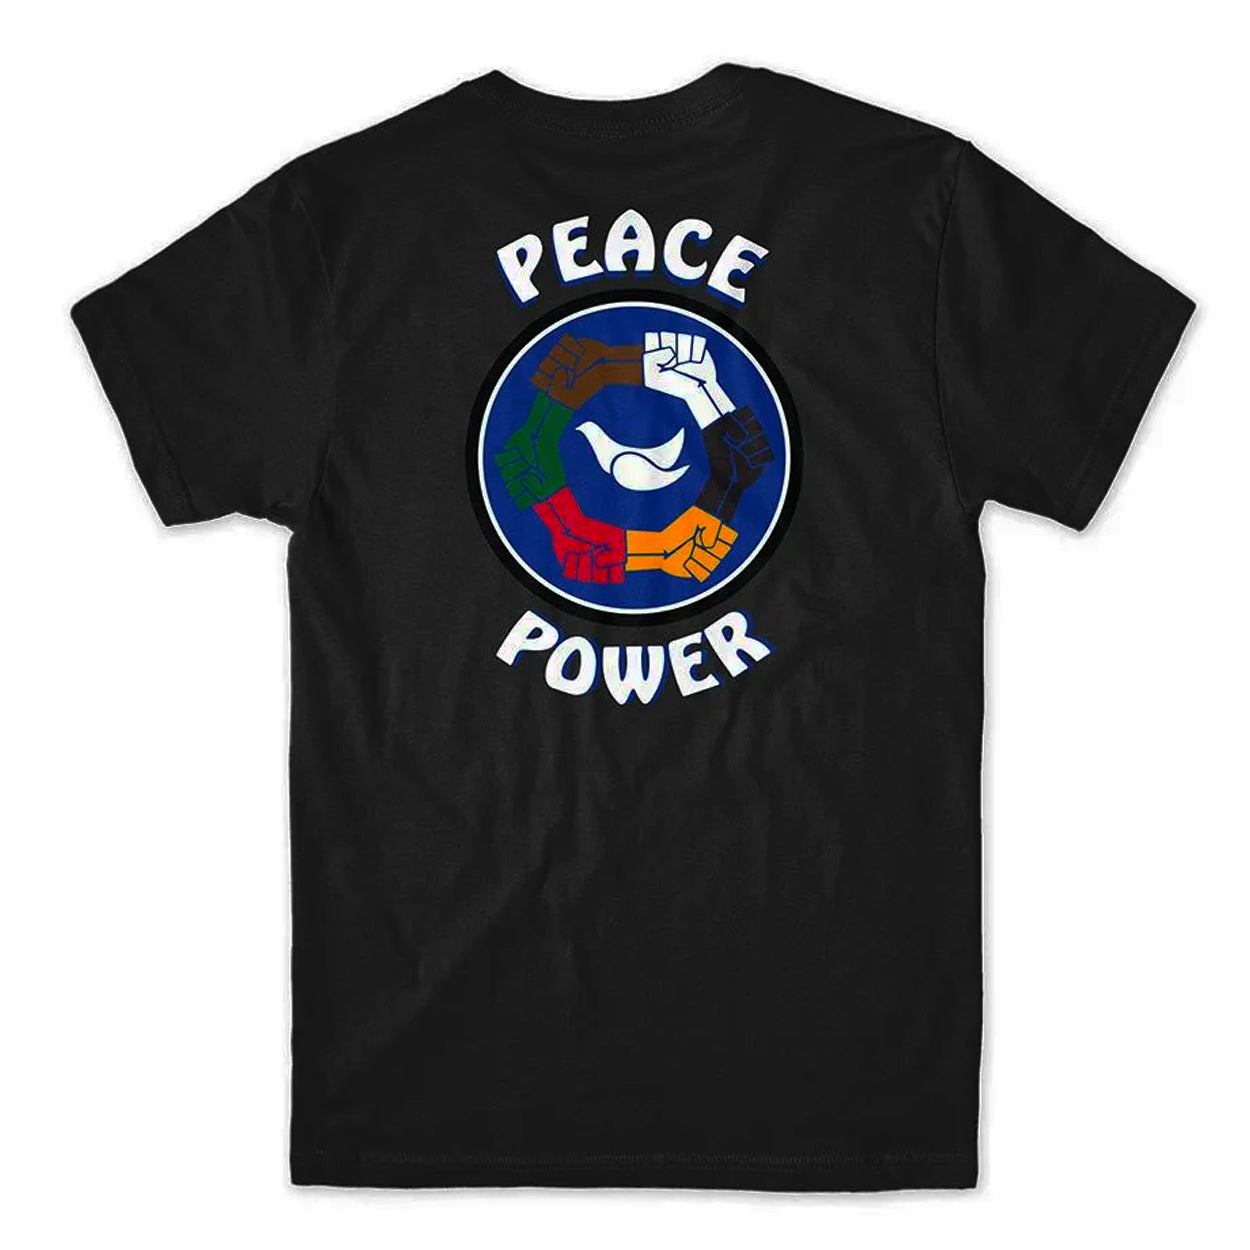 Chocolate Skateboards Peace Power T-Shirt - Black - Prime Delux Store